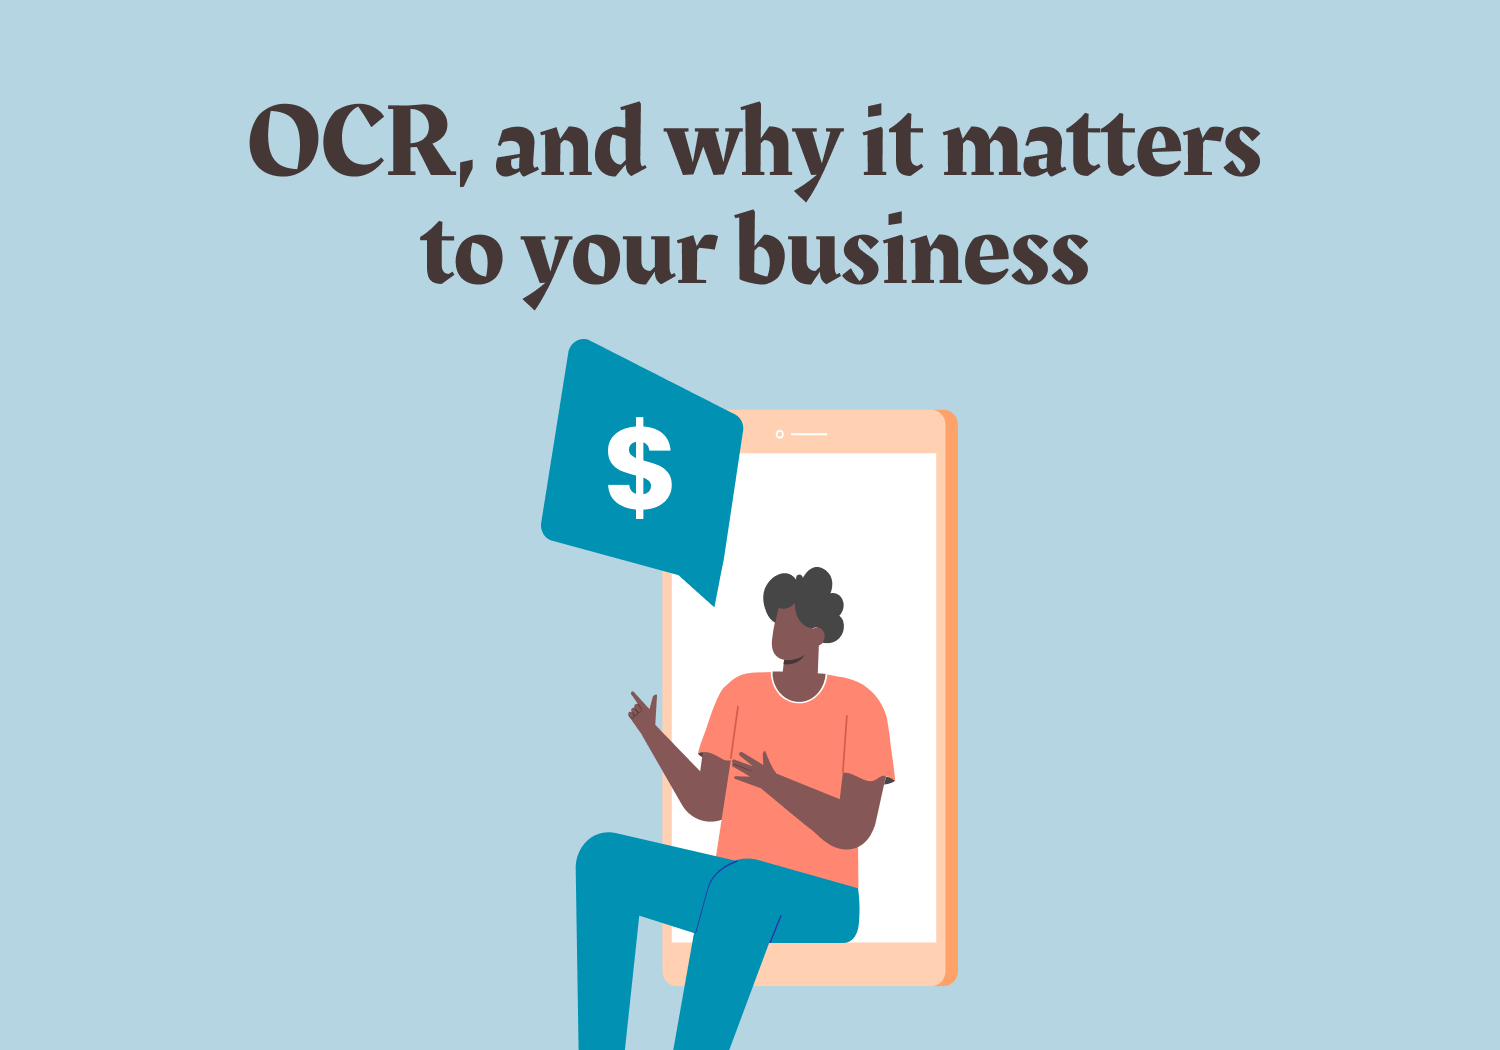 OCR and why it matters to your business